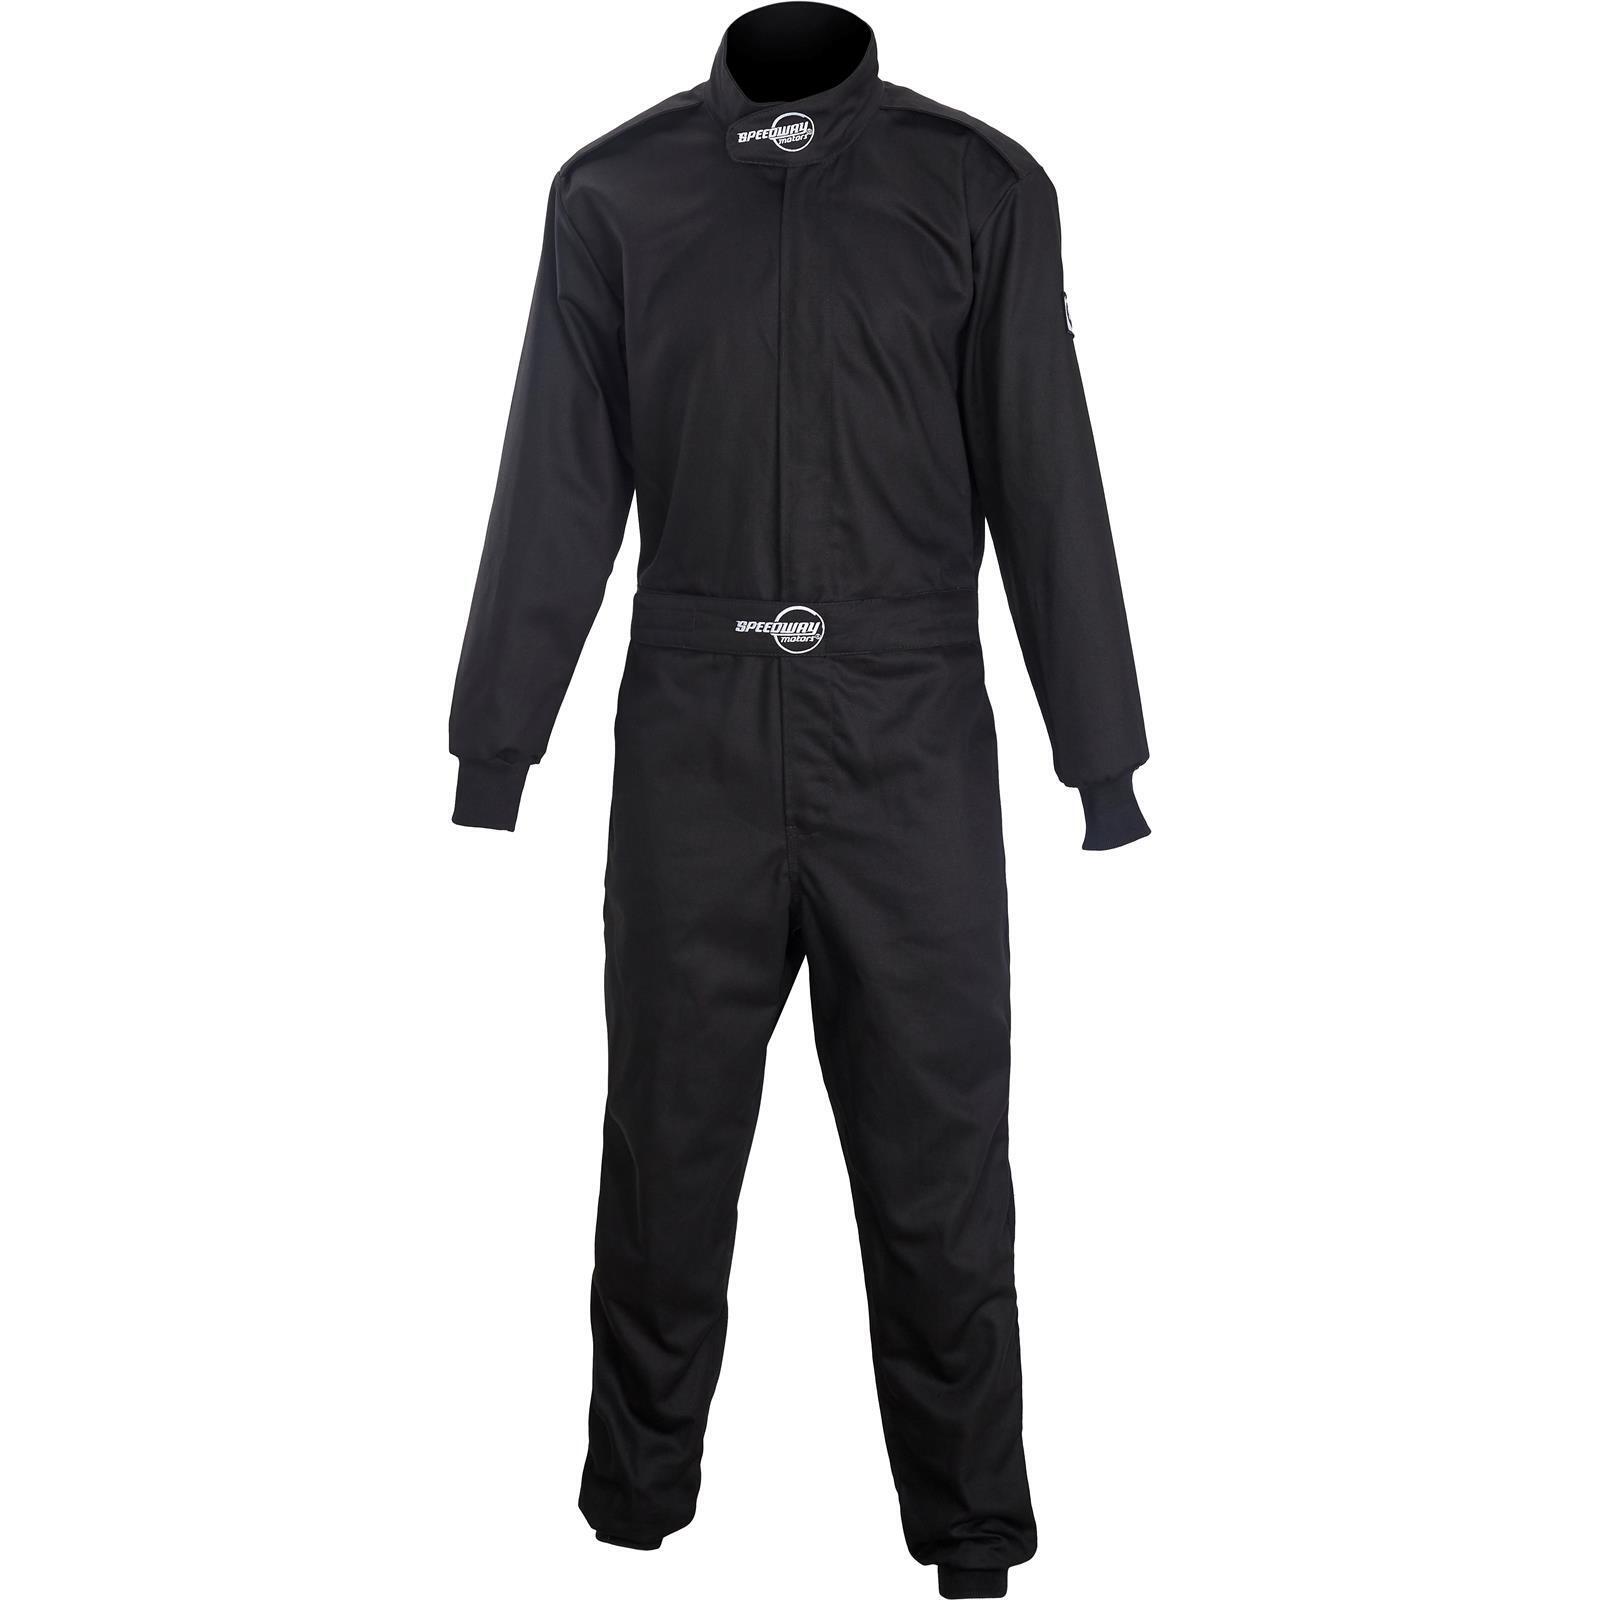 Speedway Racing Suit Economy Fire Resistant Single Layer 1-Piece SFI-1 Rated